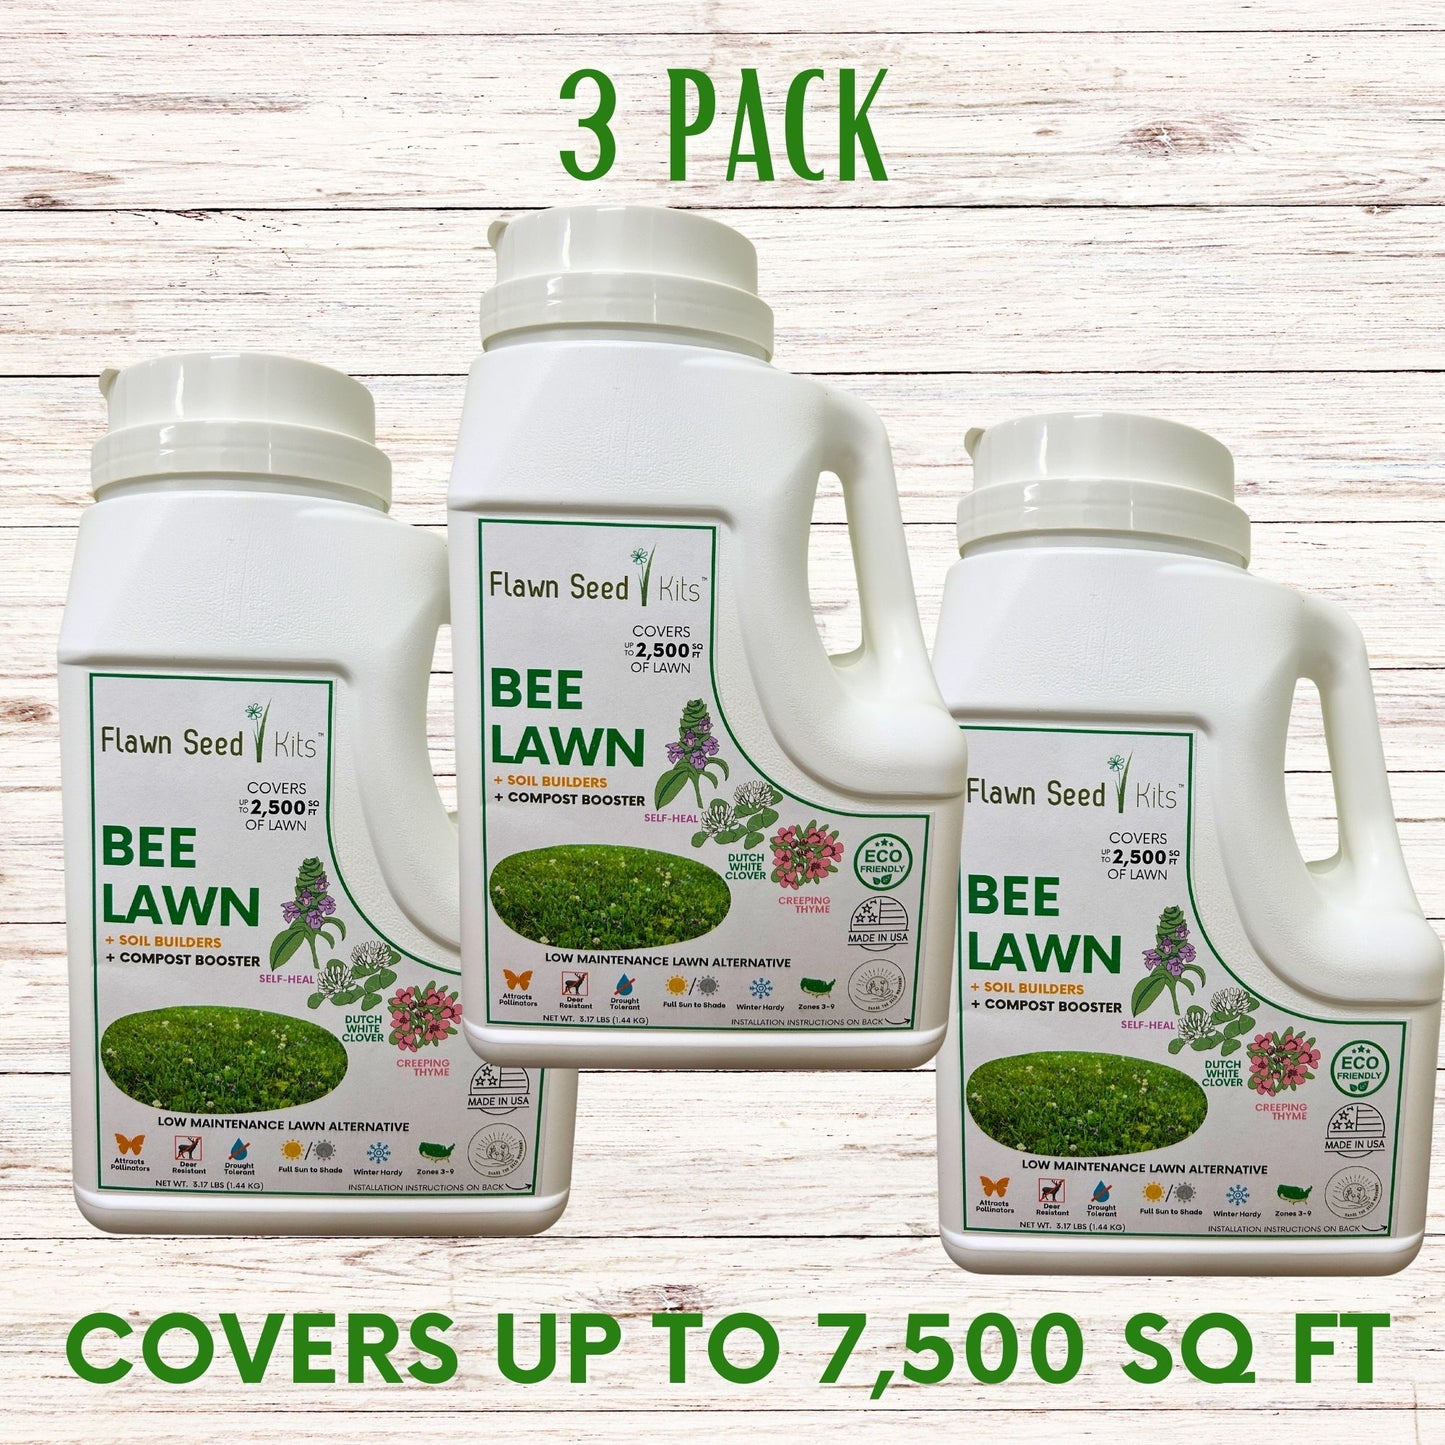 Dutch Clover Bee Lawn Seed Mixture - Easy Spread Shaker